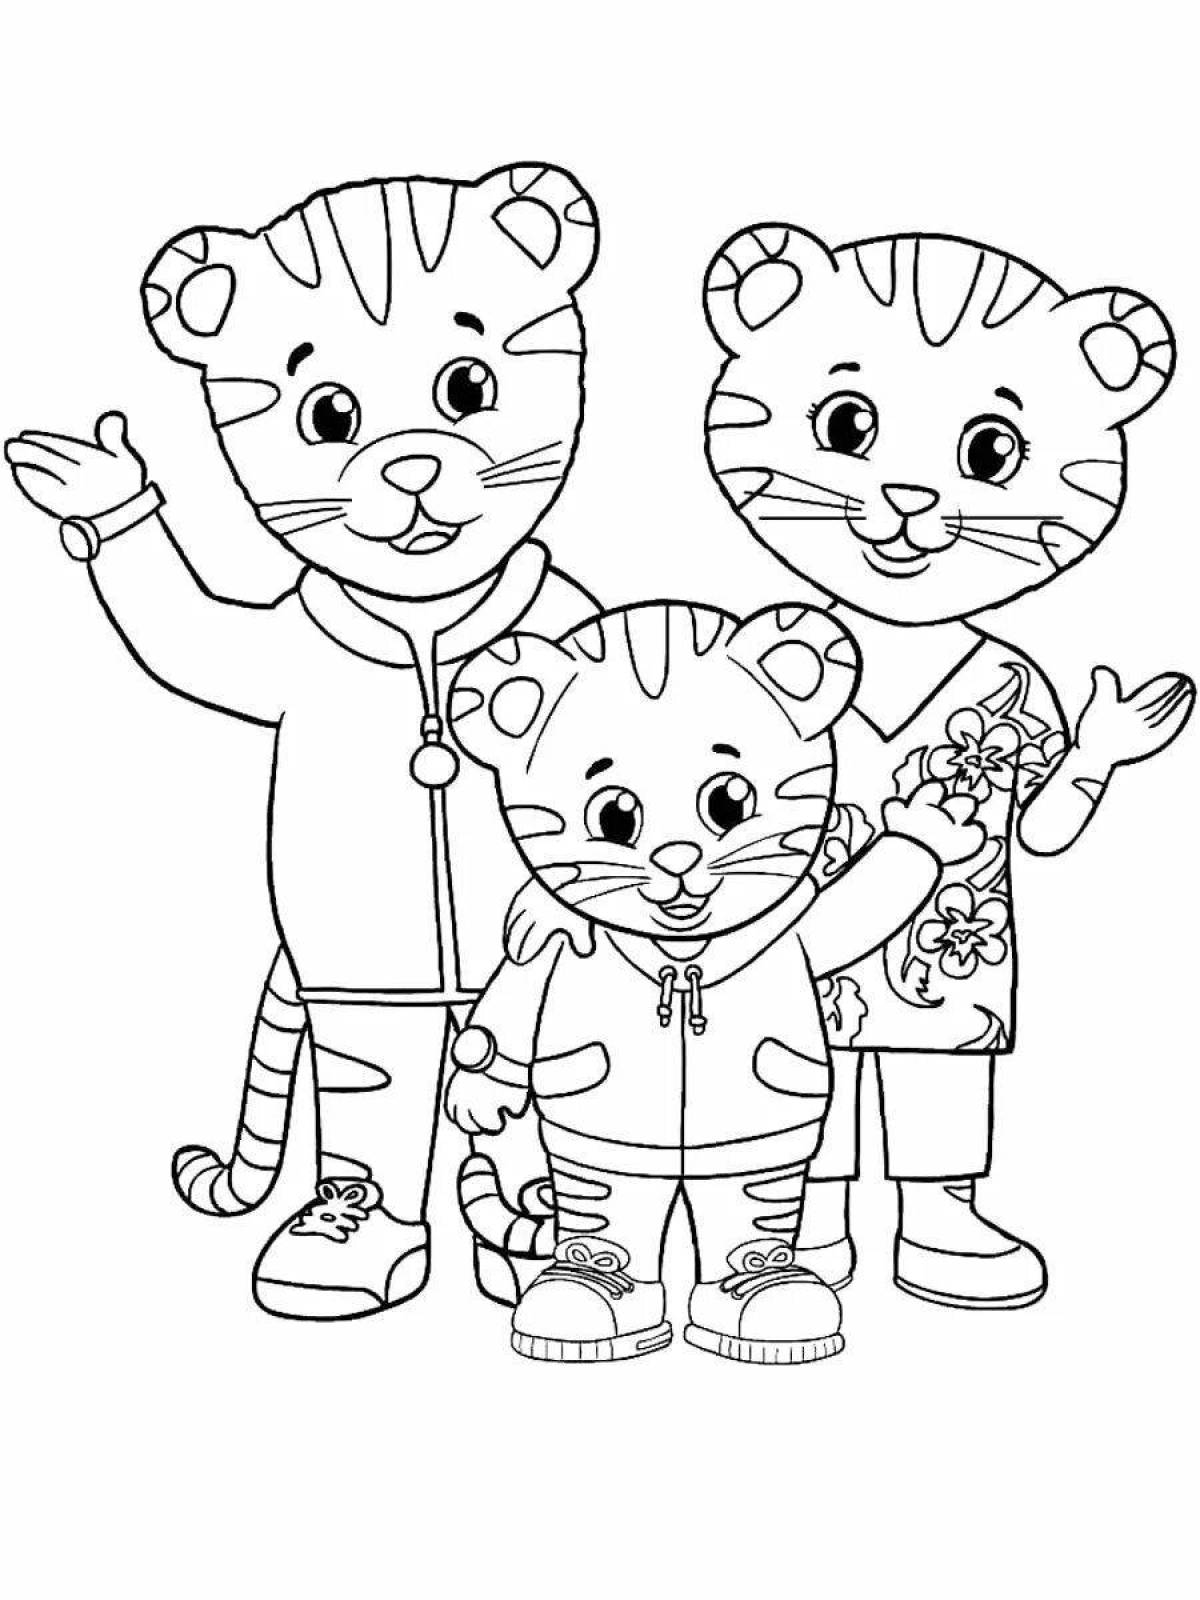 Coloring book funny tiger family